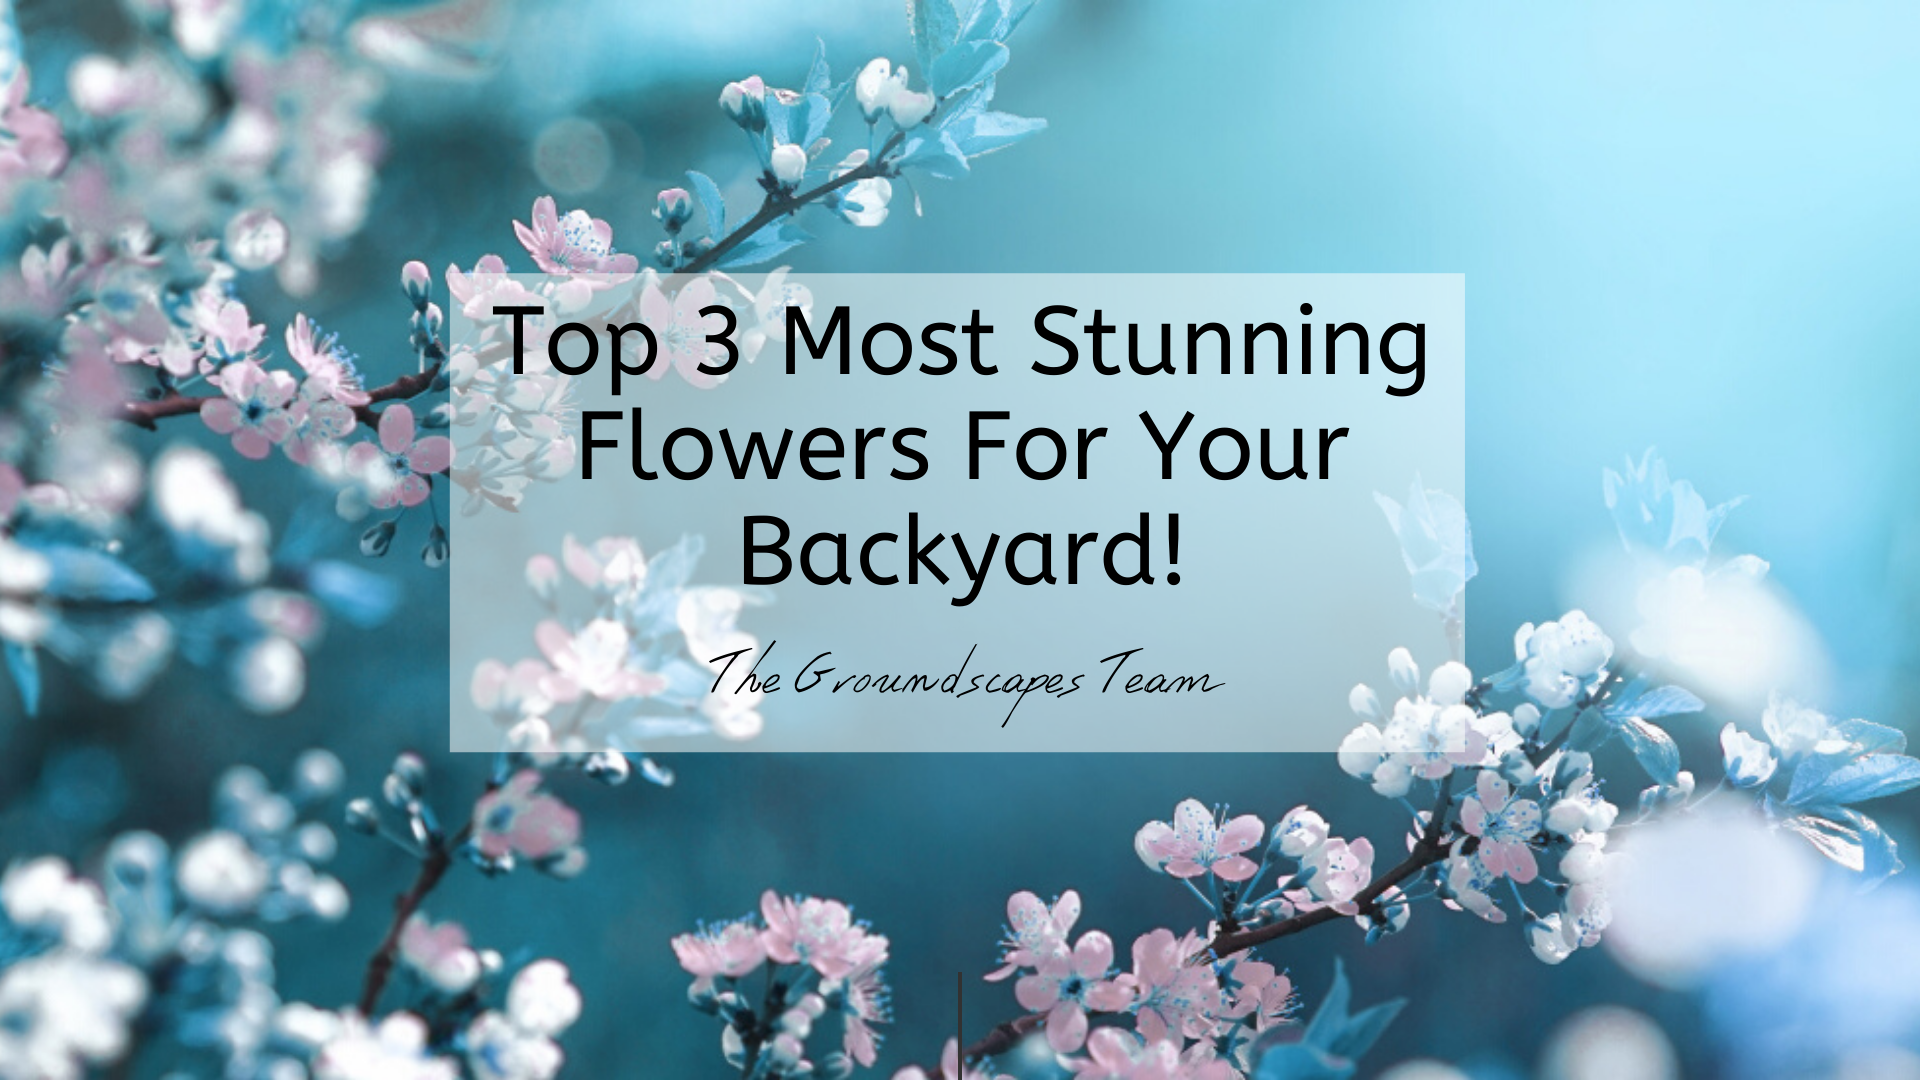 The Top 3 Most Stunning Flowers For Your Backyard!